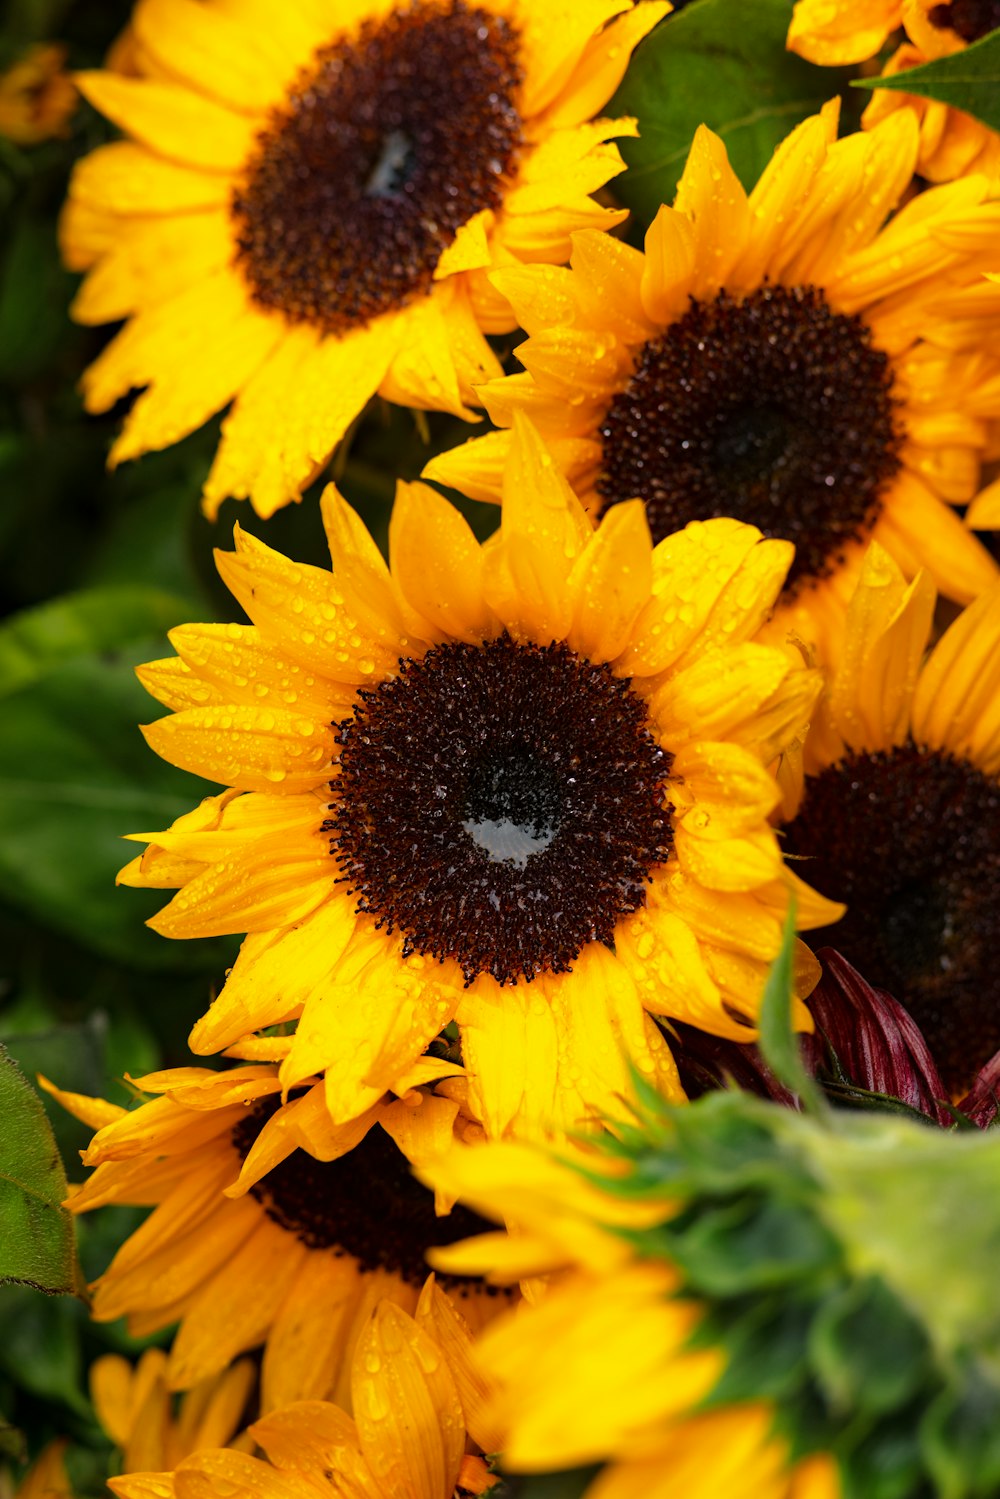 a bunch of yellow sunflowers with green leaves